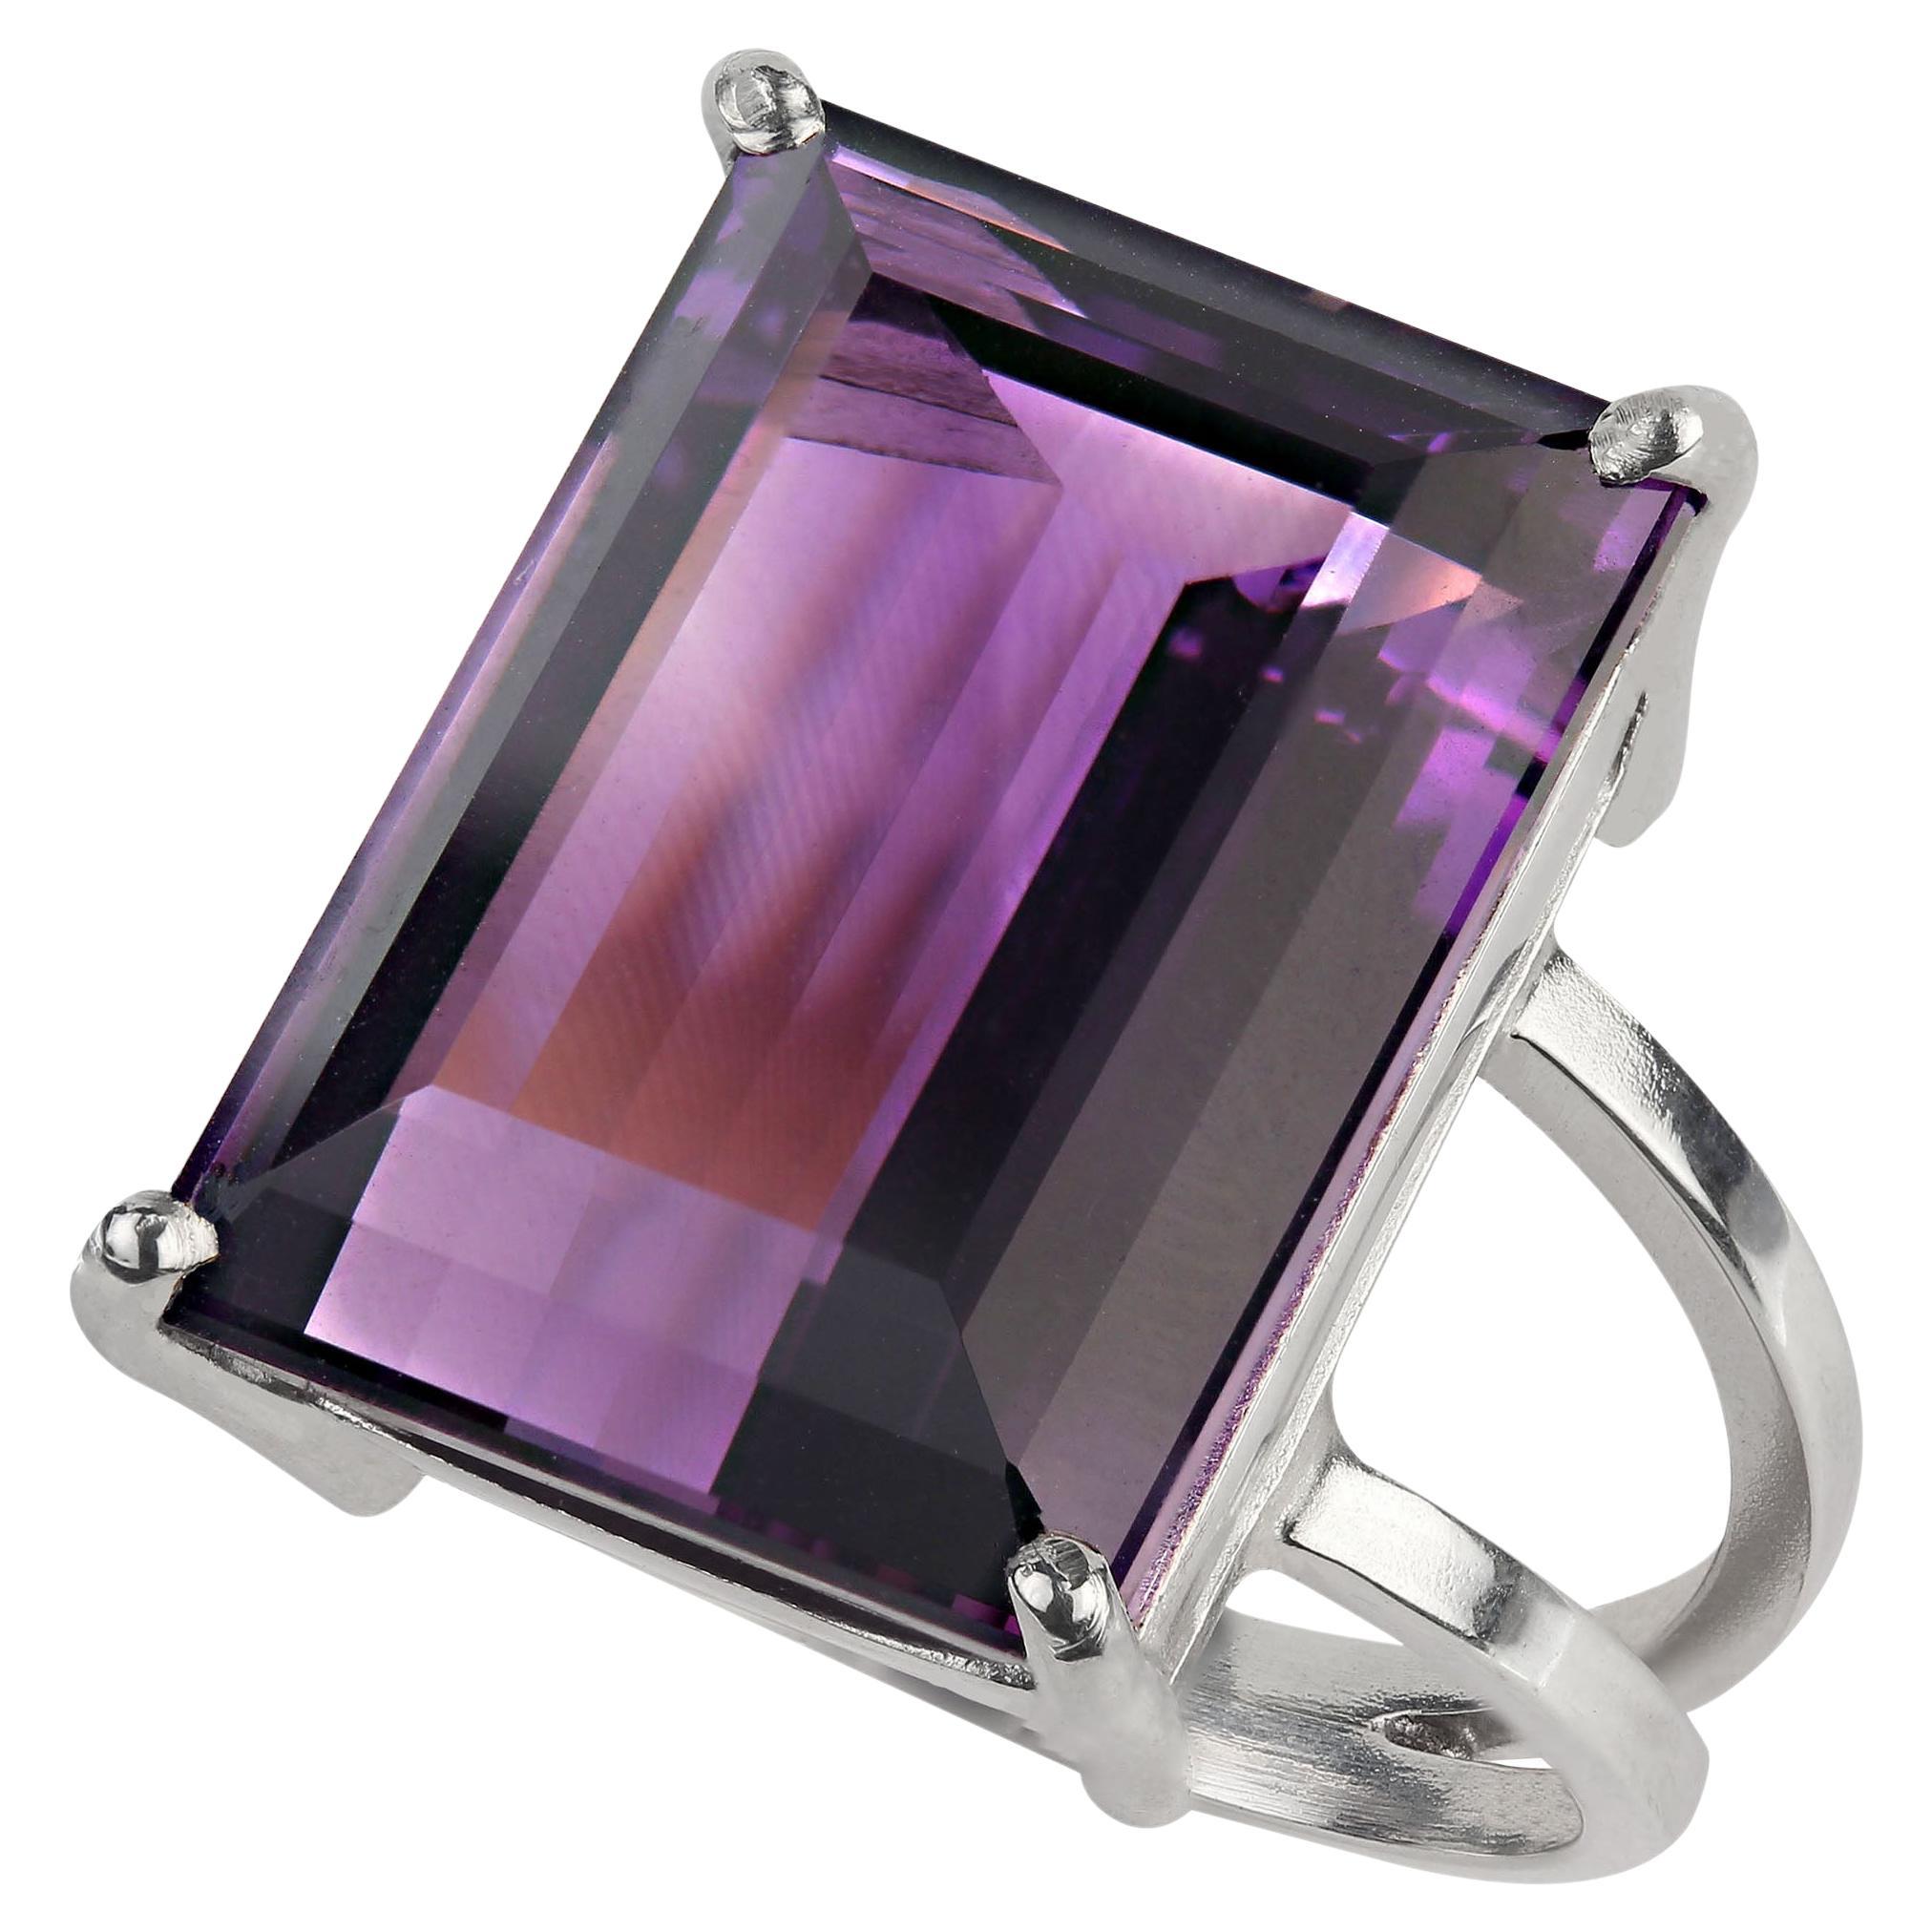 Stunning 18Ct Emerald Cut Amethyst in a handmade Sterling Silver ring.  This ring was handcrafted in Belo Horizonte, Minas Gerais, Brasil and comes from our favorite resident vendor with whom we've been working since back in the days when I lived in